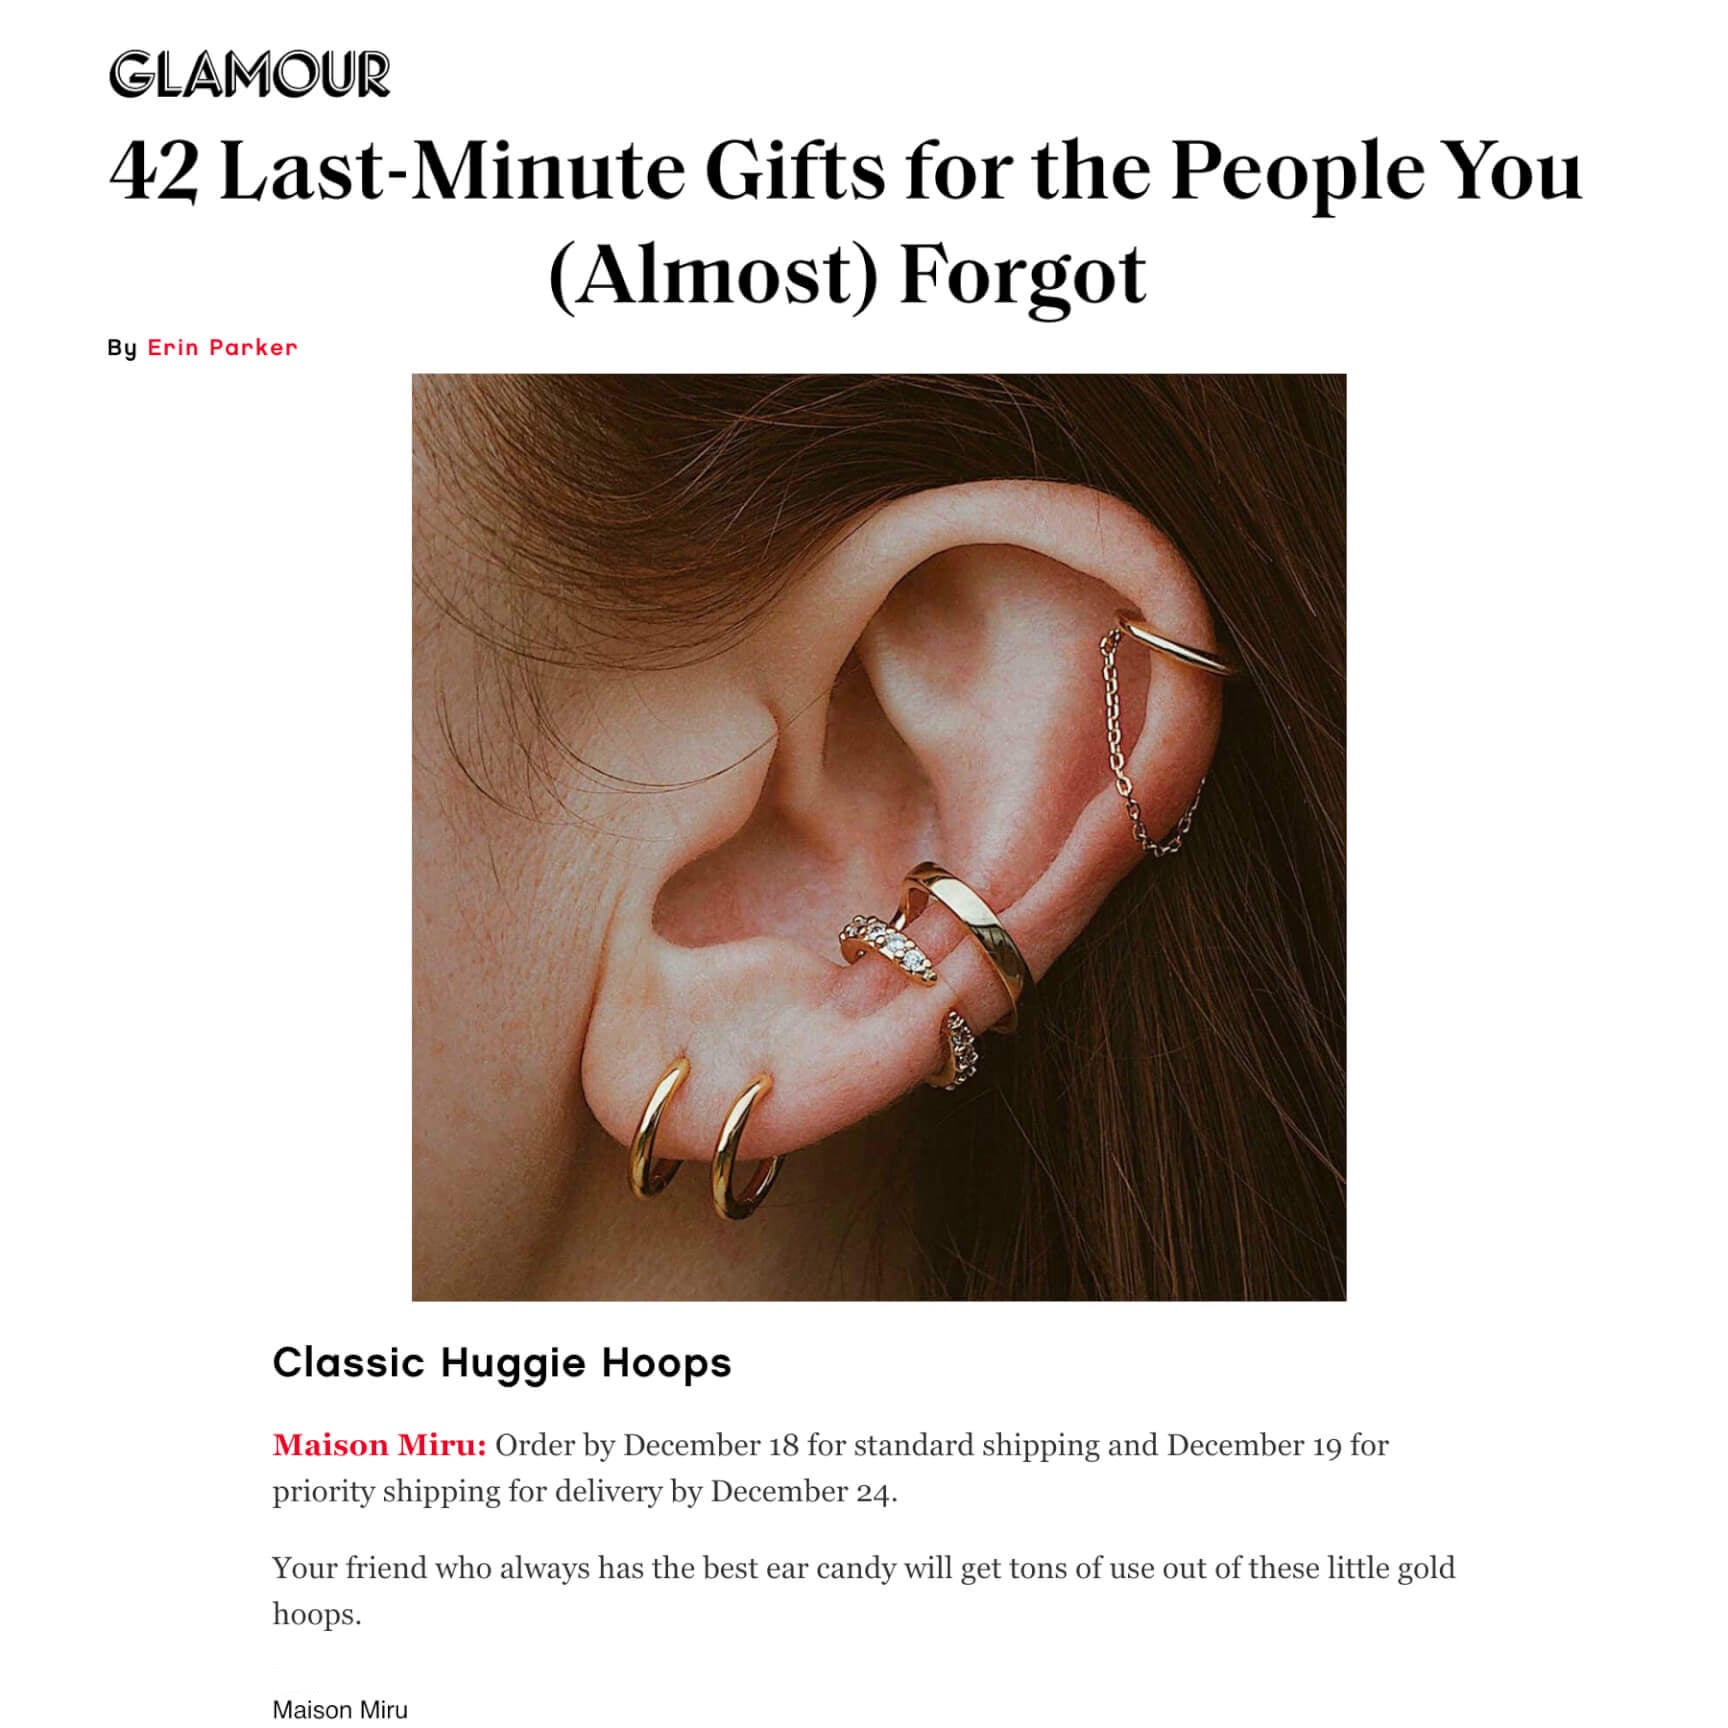 Classic Huggie Hoops as seen in Glamour